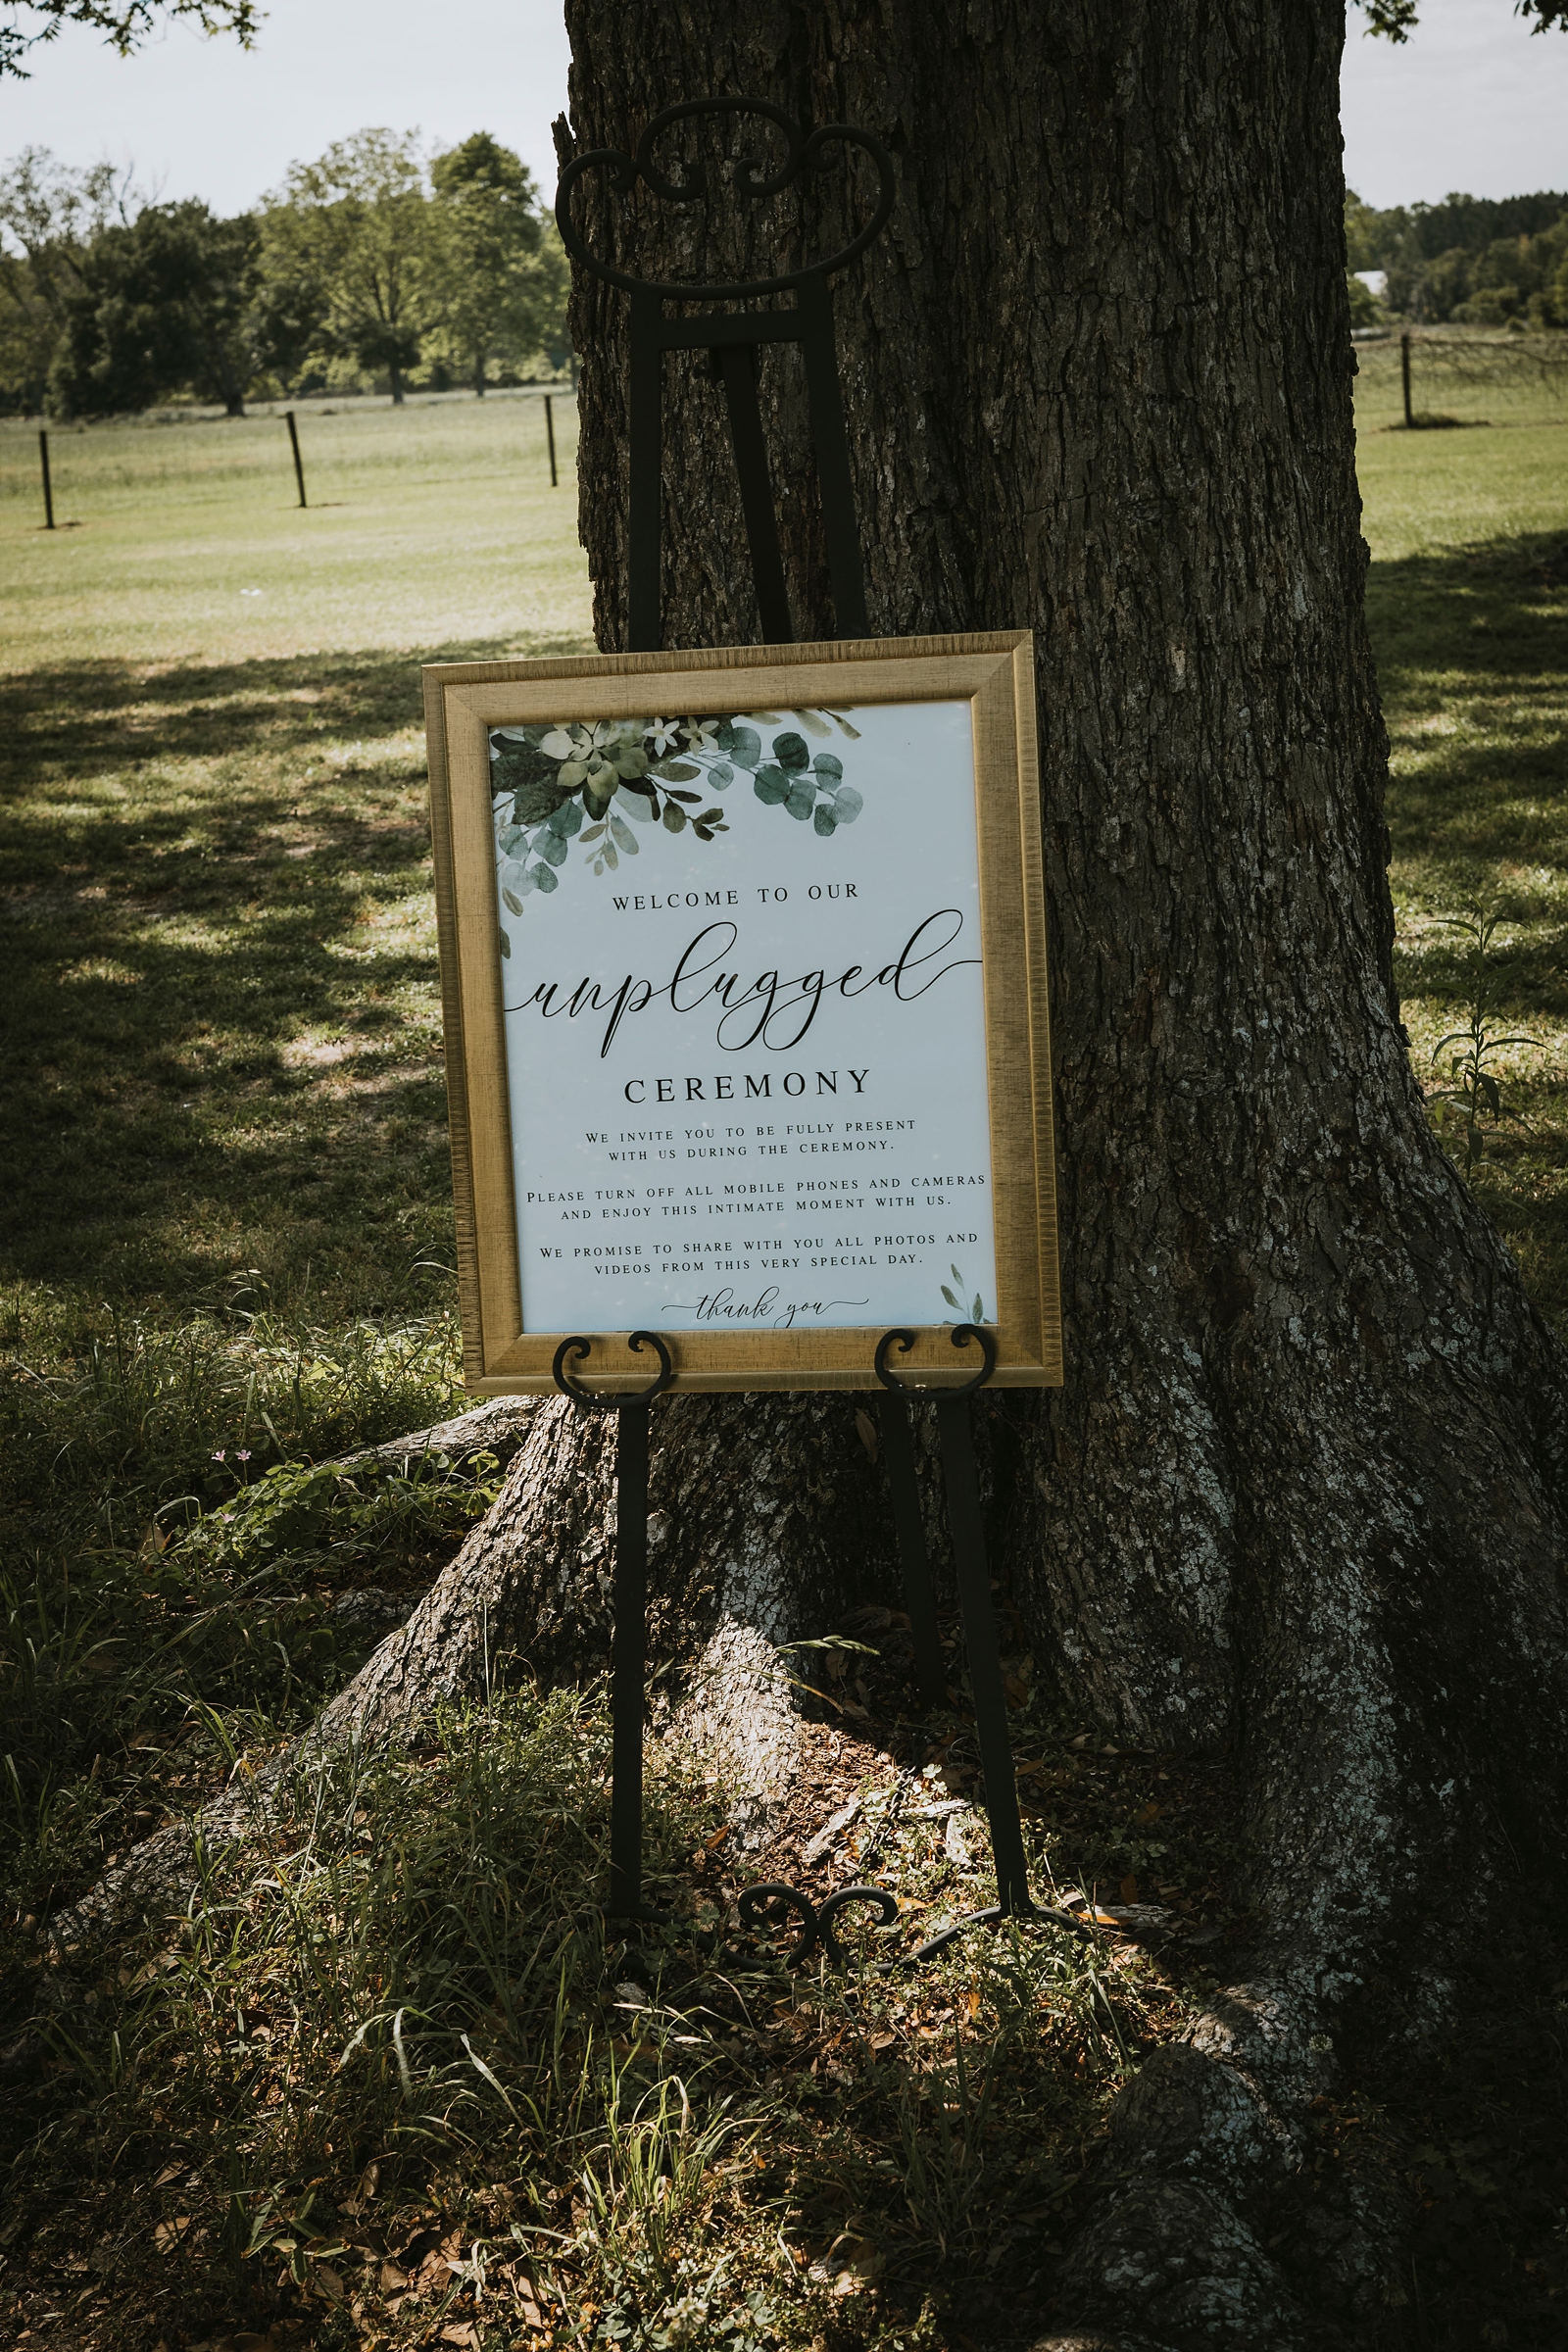 Why are unplugged ceremonies important?